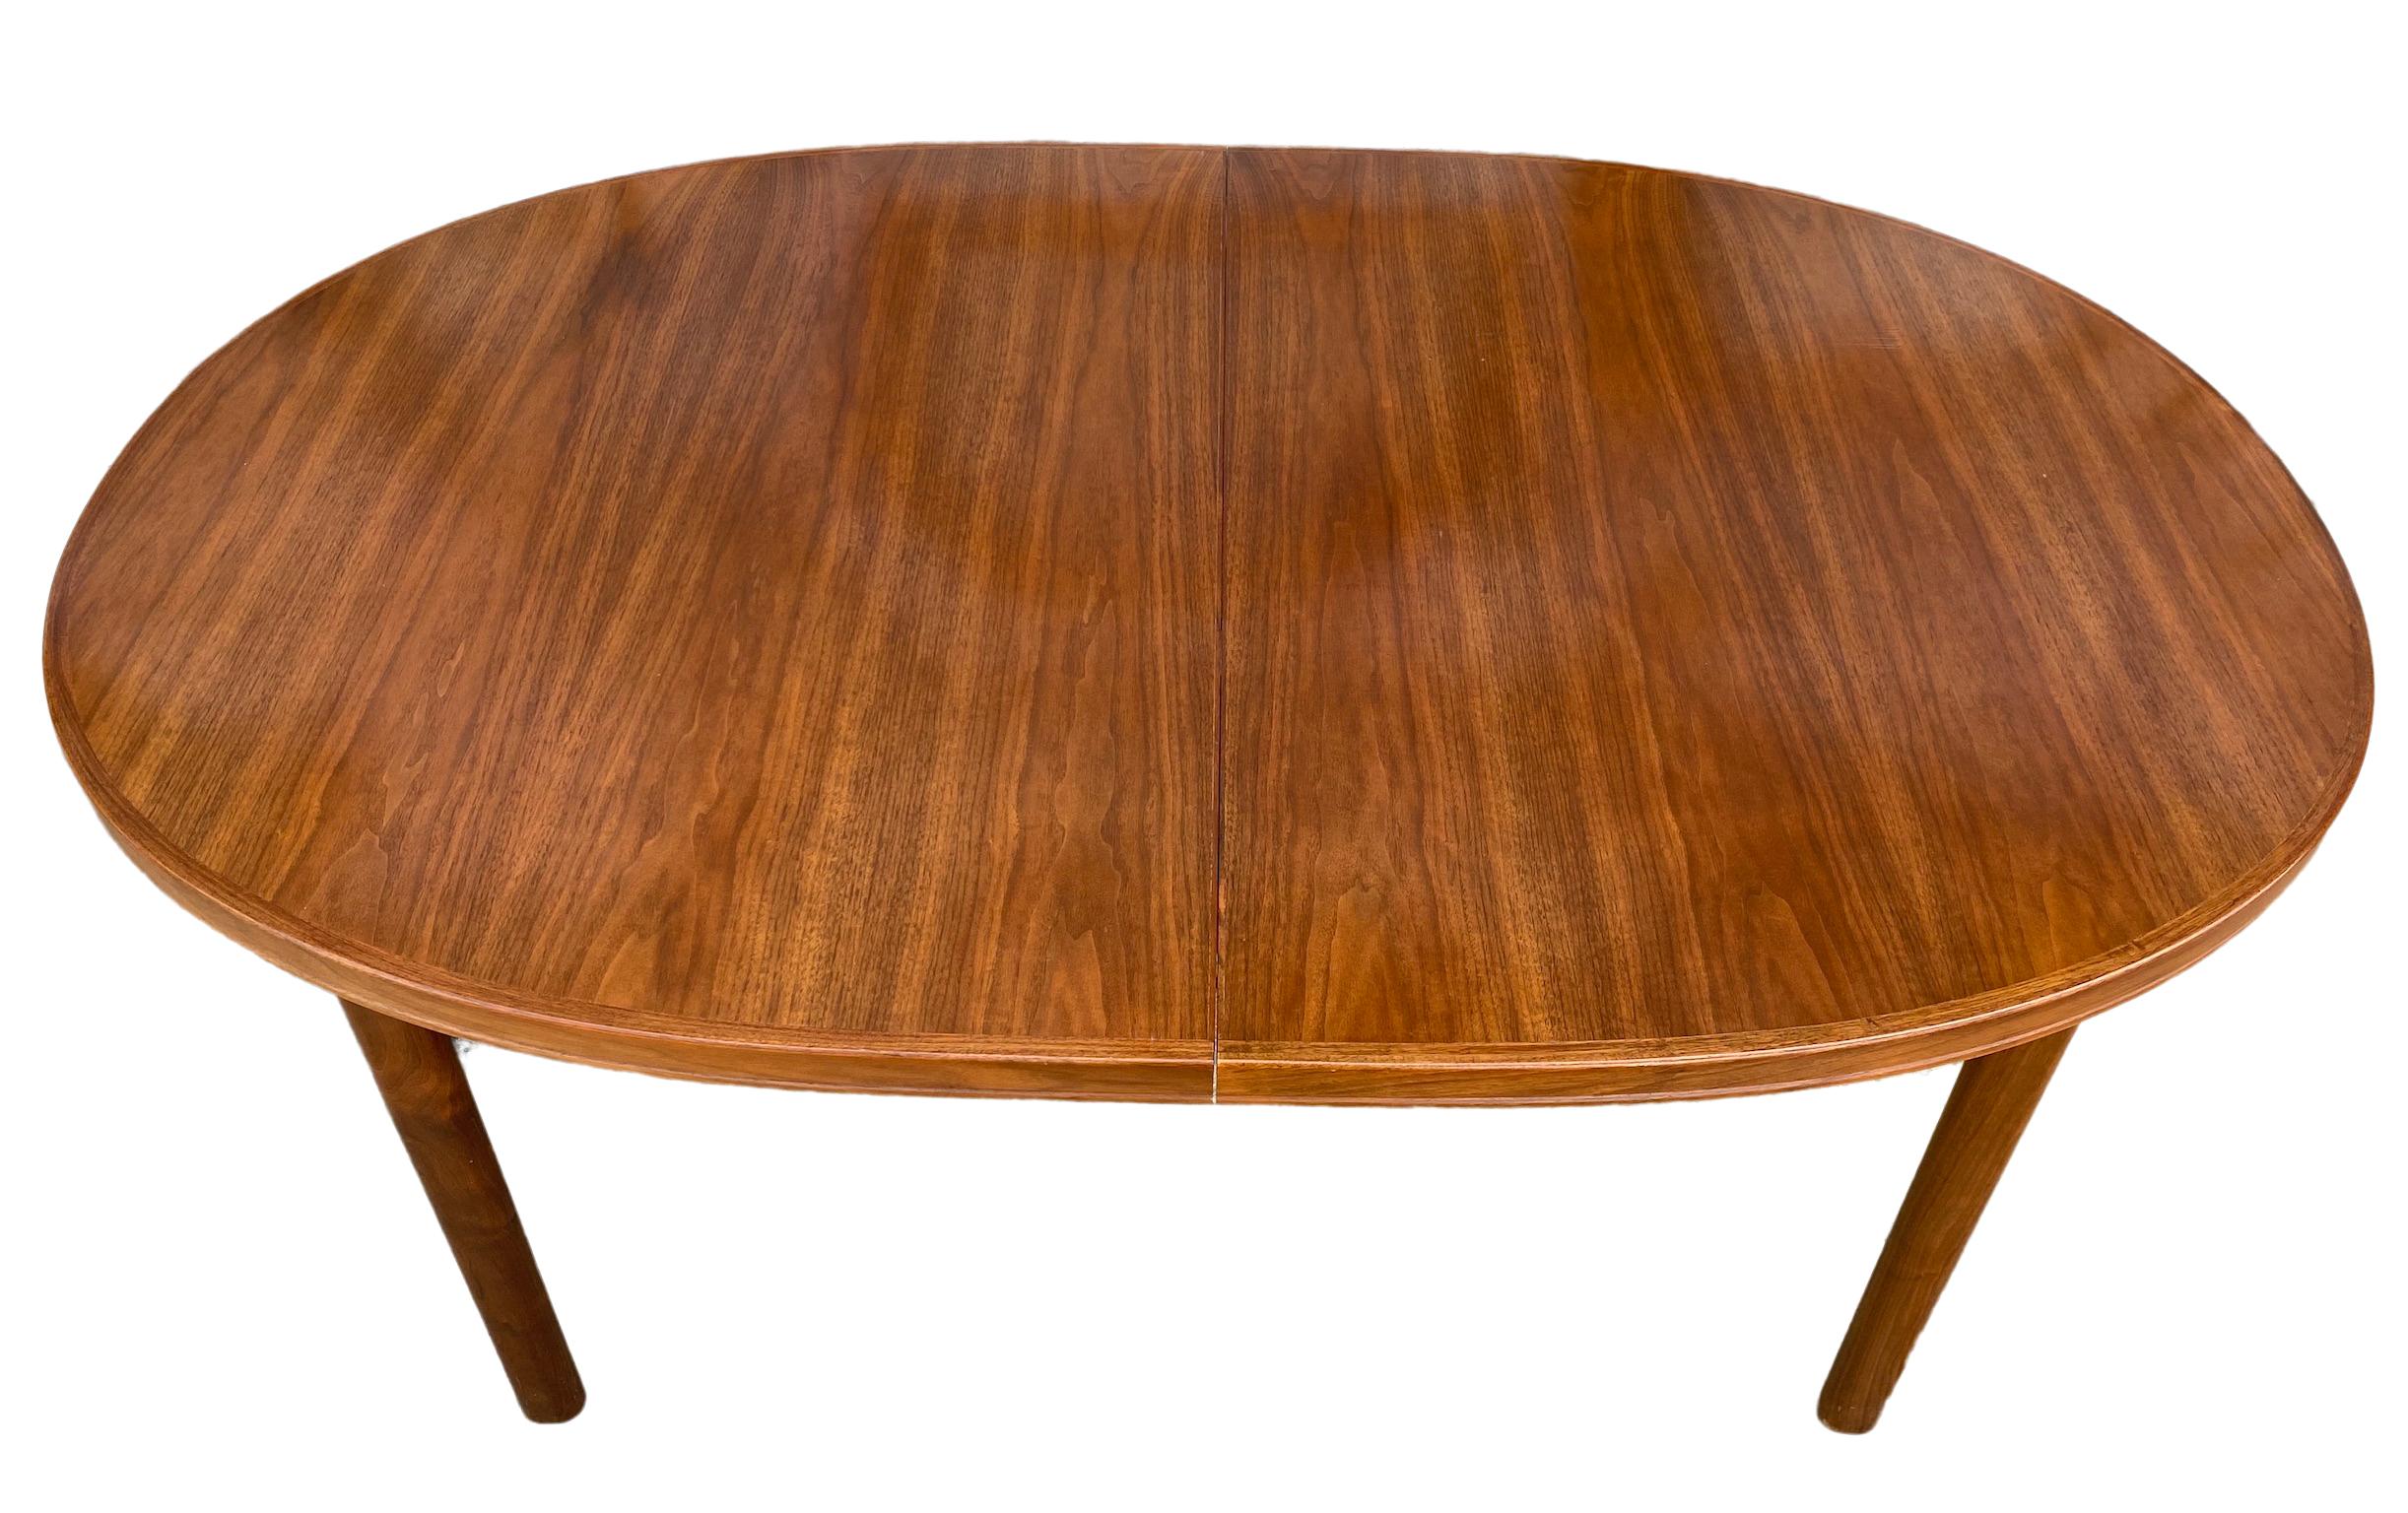 Midcentury solid teak Elliptical oval Danish Swedish extension dining table with (2) leaves. This table is very high quality hand built in Sweden. Solid teak legs with 4 leg base. This table is in great vintage condition, the (2) leaves match the